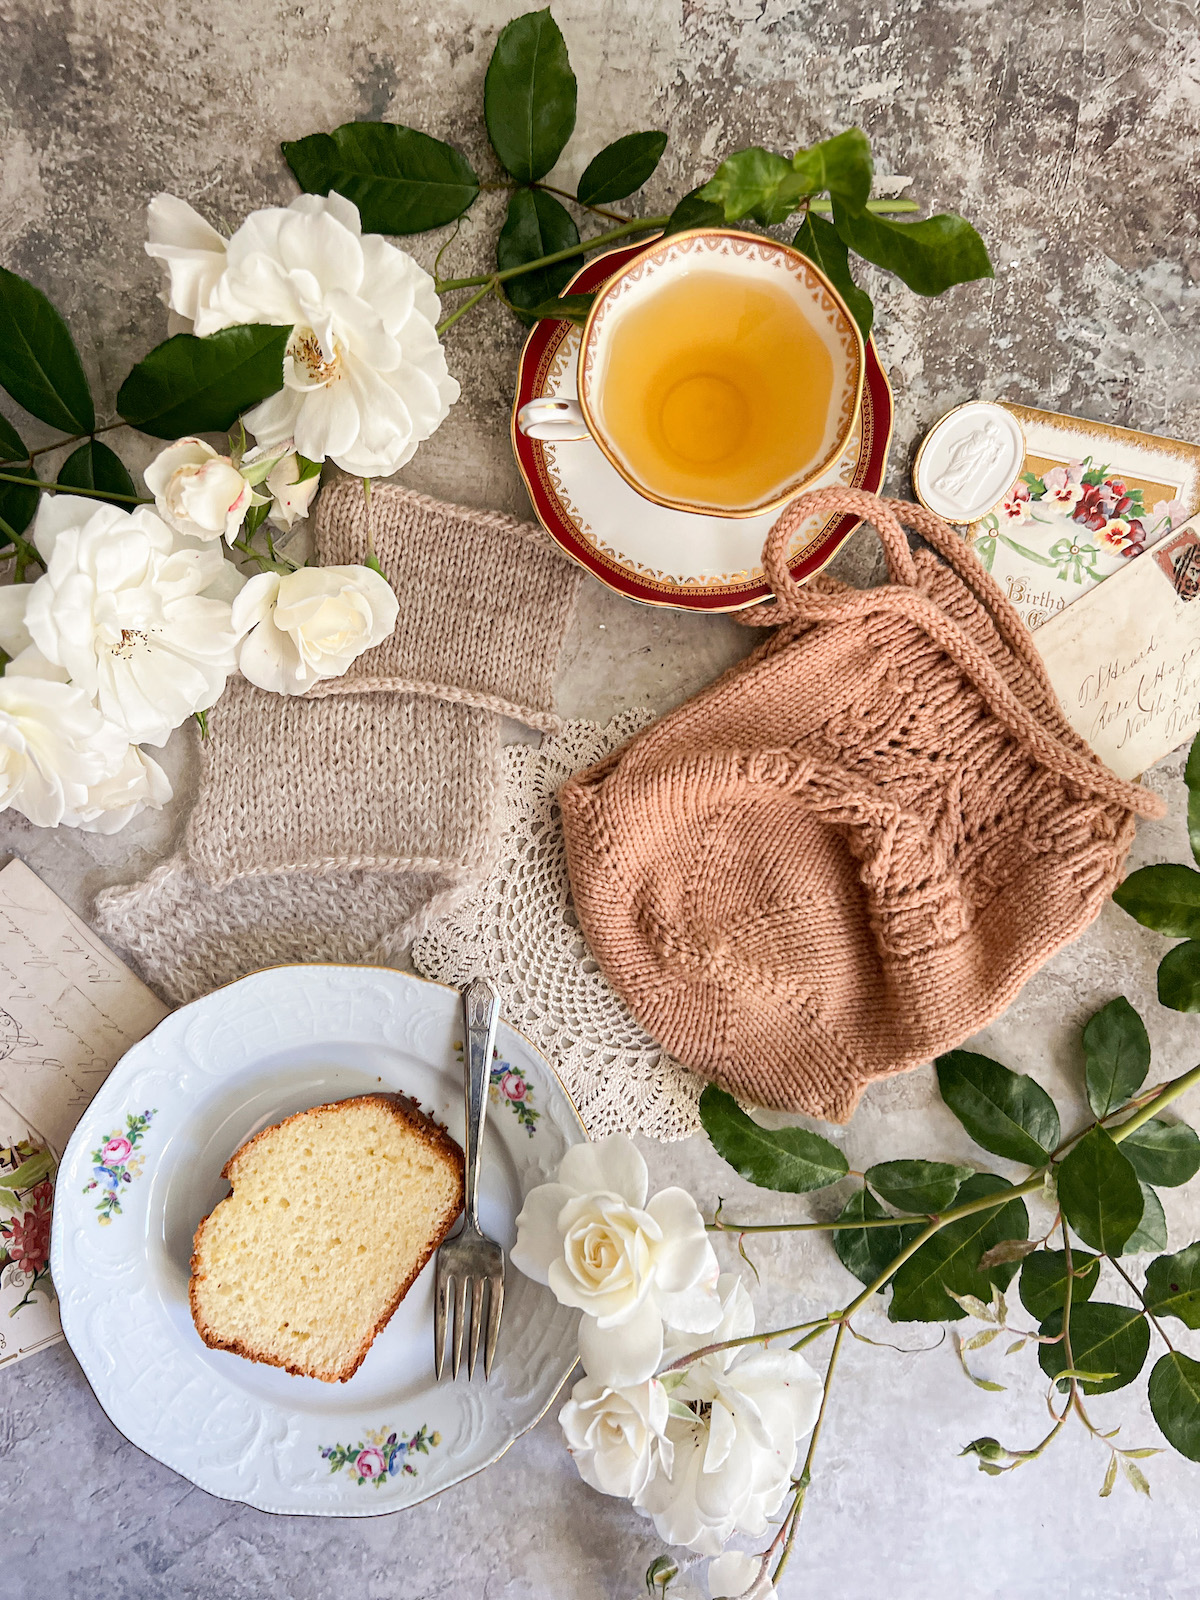 A flatlay photo showing a tea cozy with lots of KFB increases on its bottom, some antique paper ephemera, white roses, a vintage doily, a plate with a slice of cake, three knitting swatches, and a teacup full of chamomile.